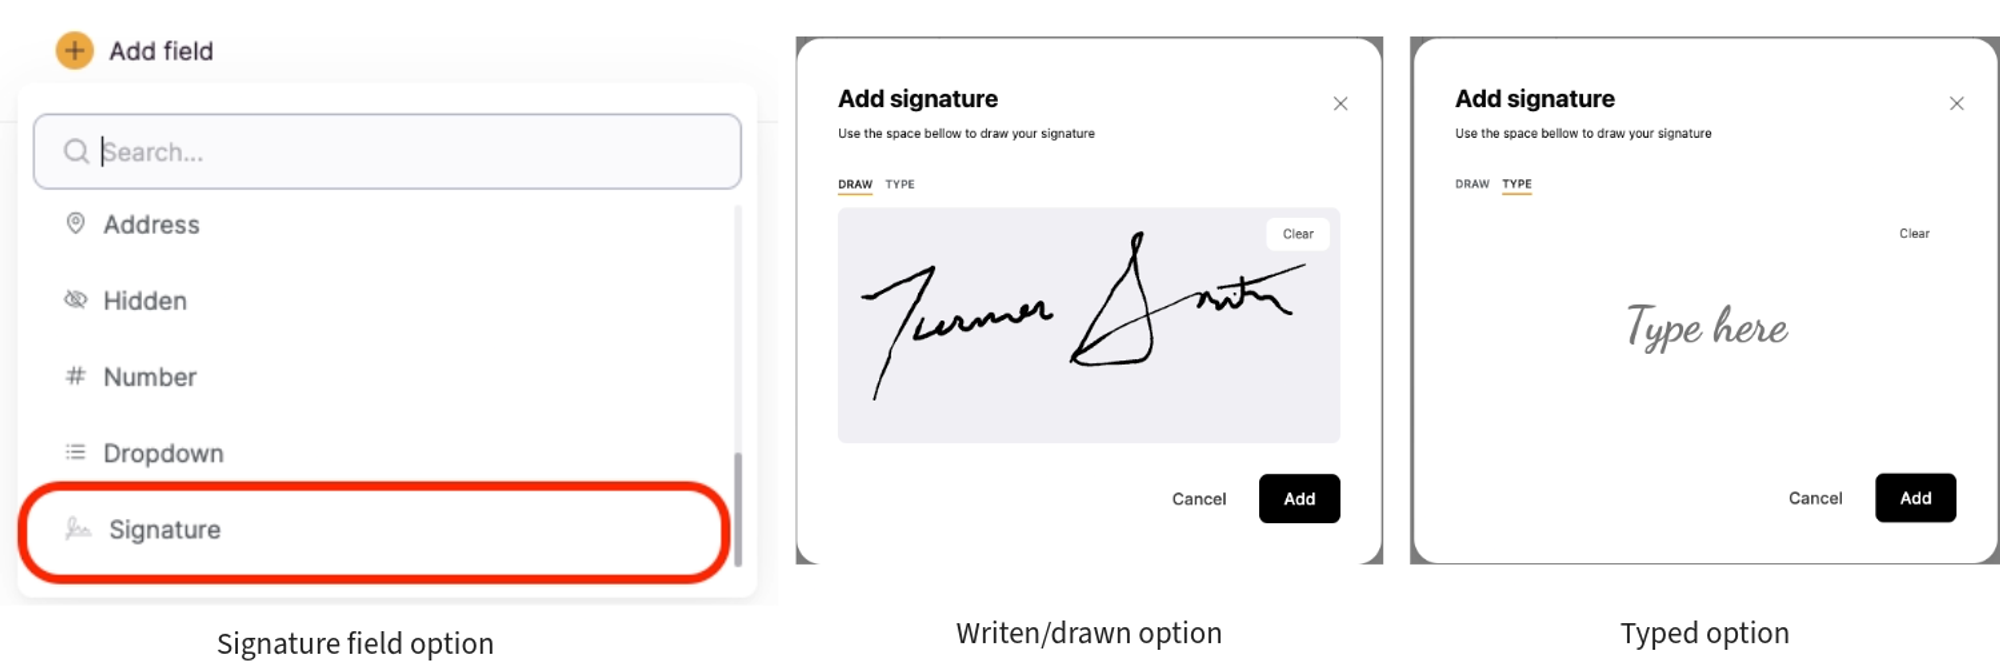 Signature field selection and draw or type option modals